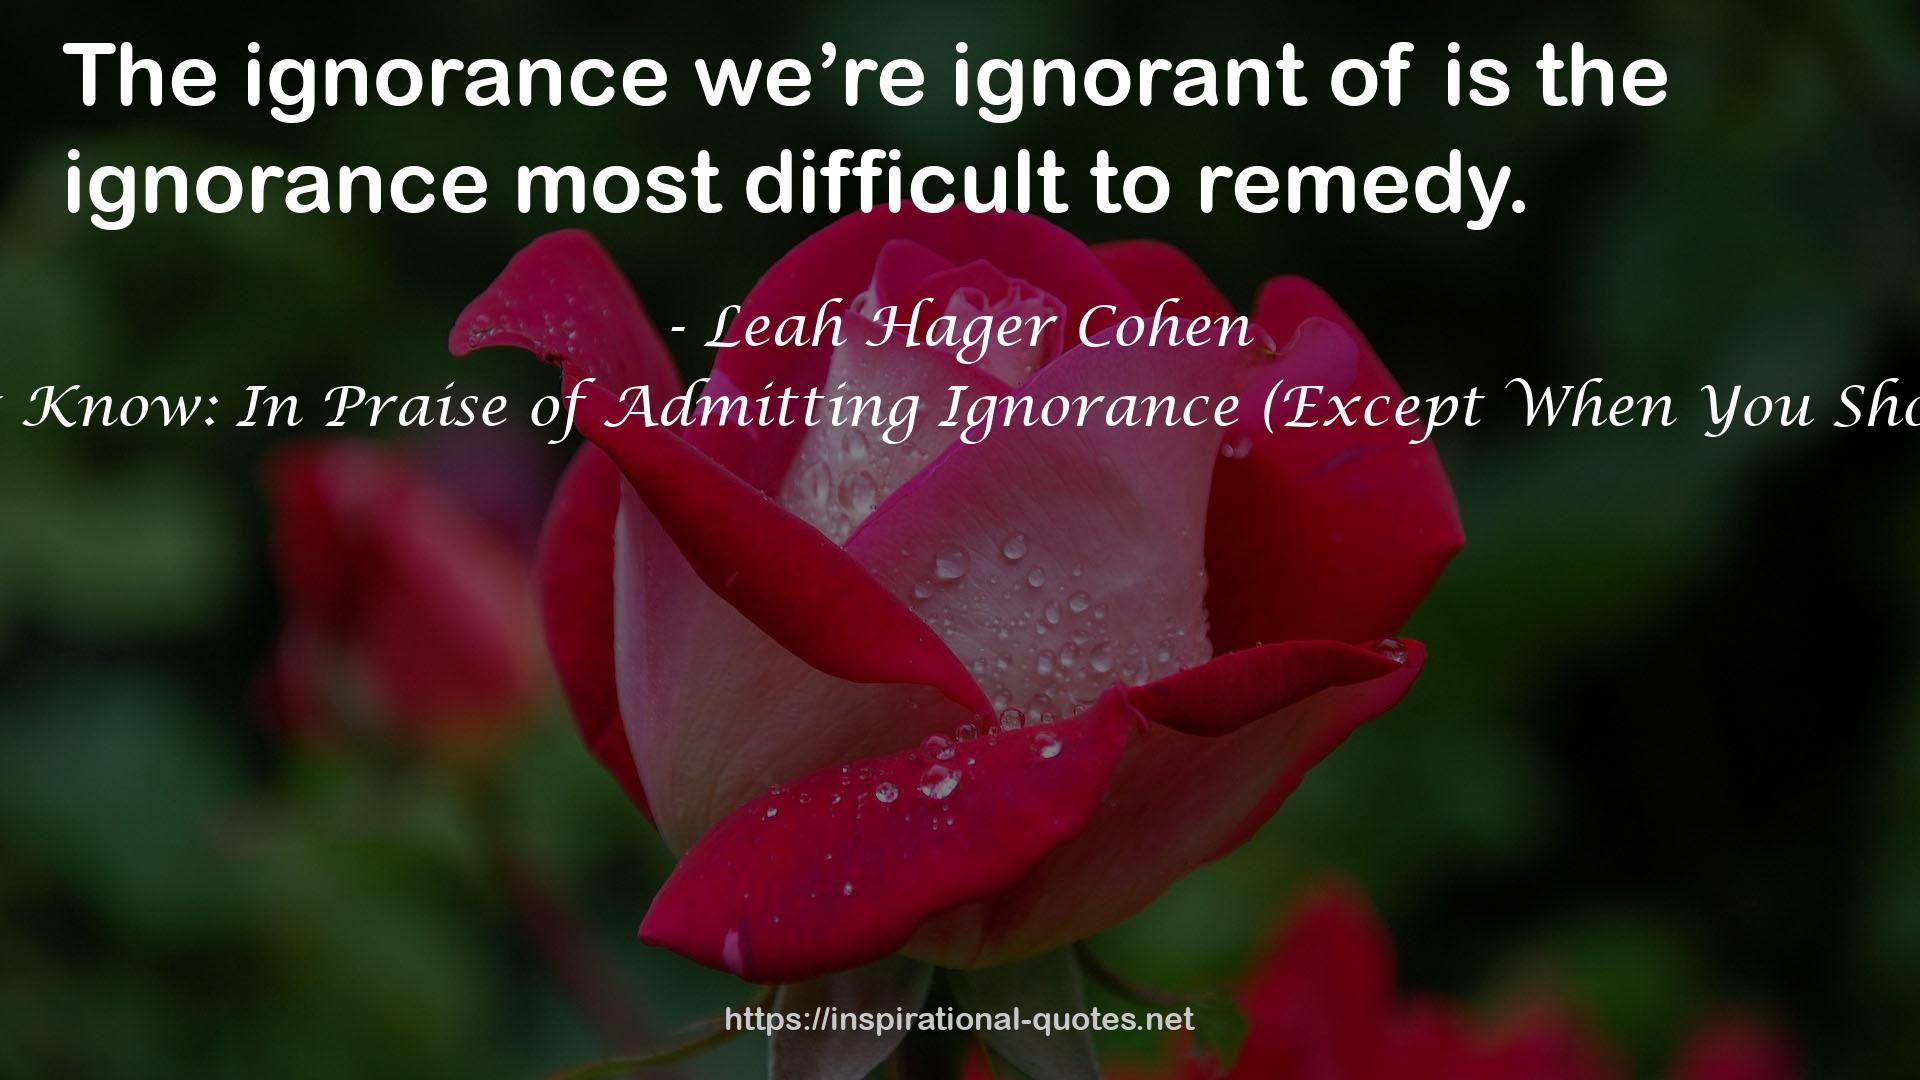 I Don't Know: In Praise of Admitting Ignorance (Except When You Shouldn't) QUOTES